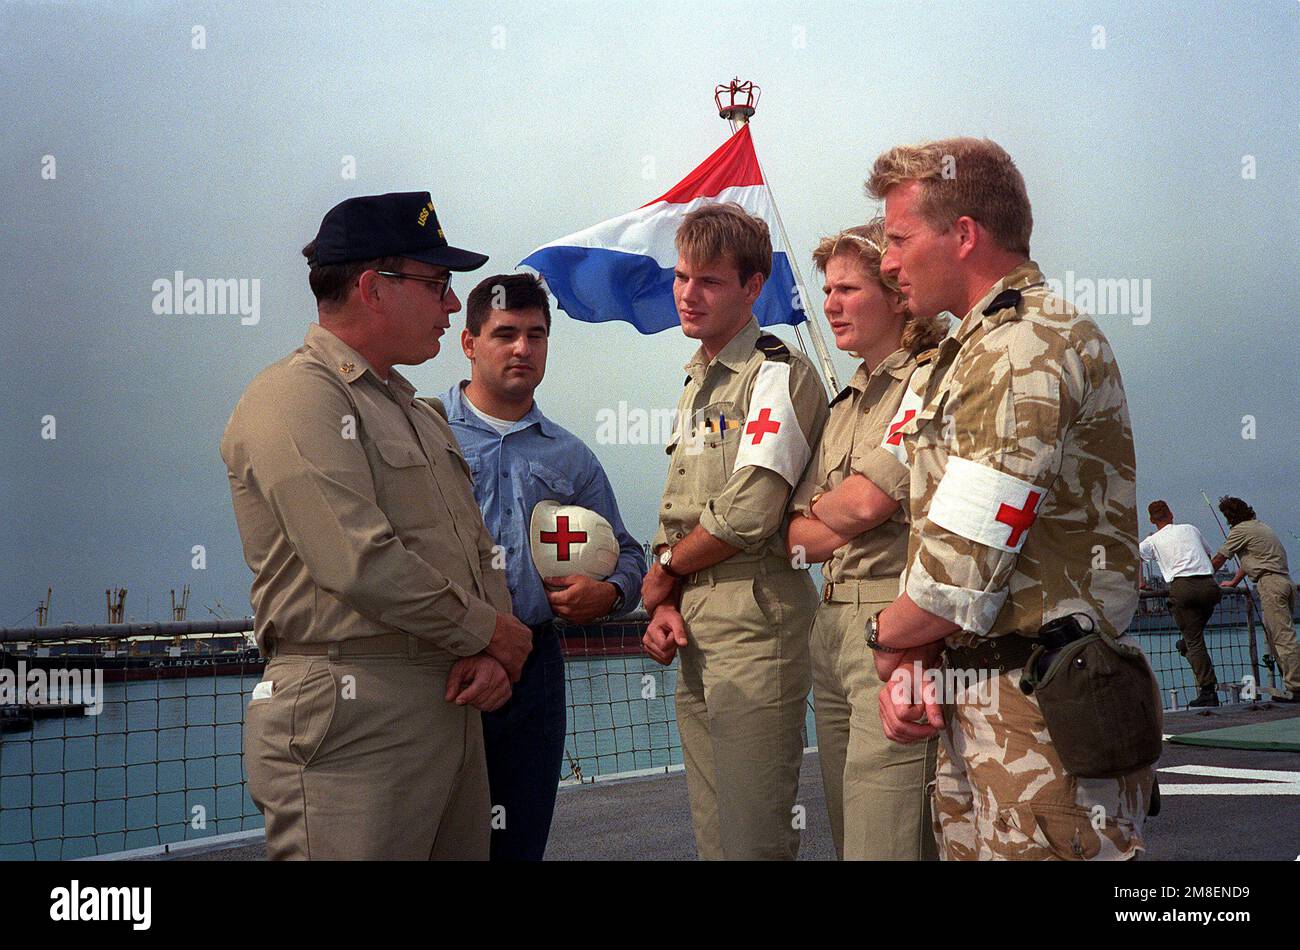 SENIOR CHIEF Hospital Corpsman W. C. Tutcher, left, and Hospital Corpsman 3rd Class Frank J. Chaves, second from left, compare notes with Dutch medical personnel on the deck of the Dutch fast combat support ship HNLMS ZUIDERKRUIS (A832) while the ship is in port during Operation Desert Storm. Tutcher and Chaves serve aboard the guided missile frigate USS MCINERNEY (FFG-8). Subject Operation/Series: DESERT STORM Country: Bahrain (BHR) Stock Photo